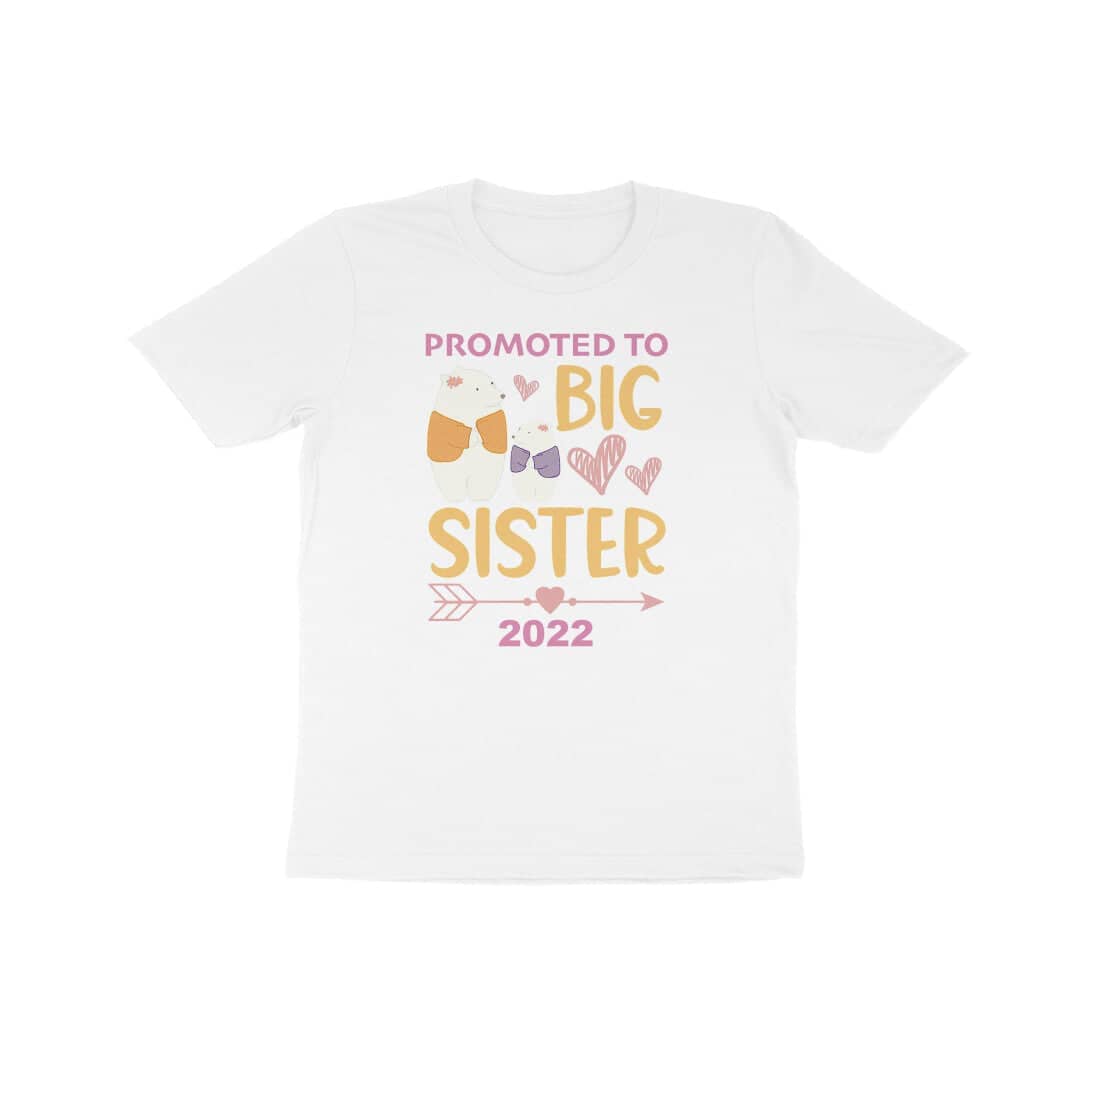 Promoted to Big Sister 2022 Special White T Shirt for Girls freeshipping - Catch My Drift India